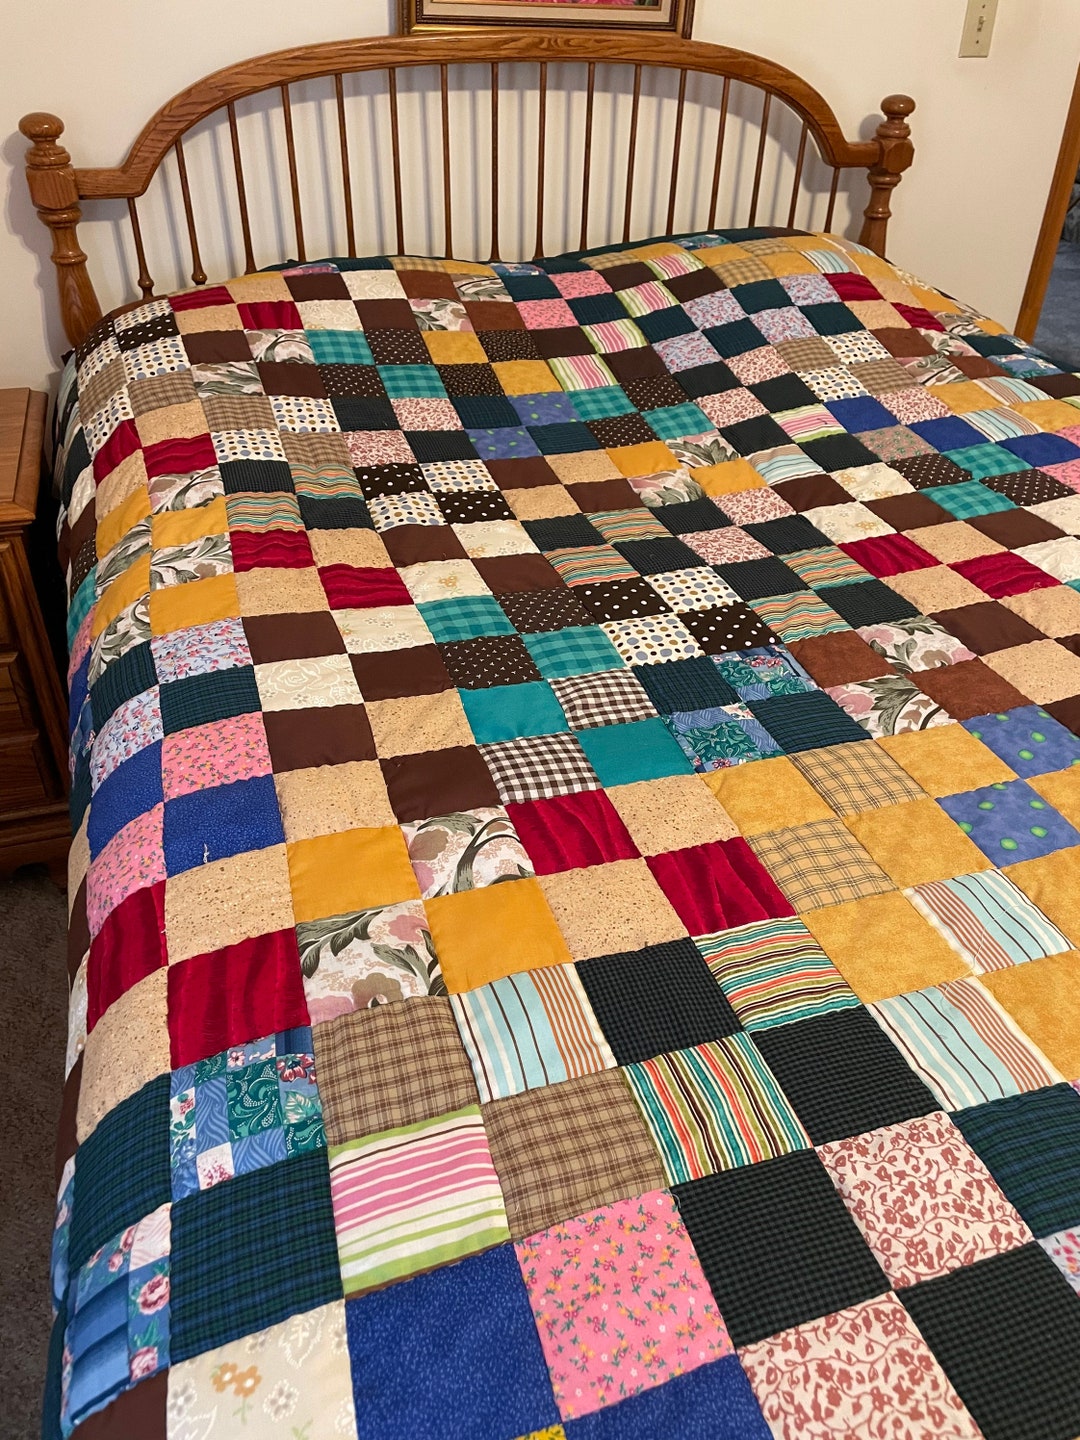 Beautiful Scrappy Patchwork Quilt With Lots of Colors Mom Hand - Etsy